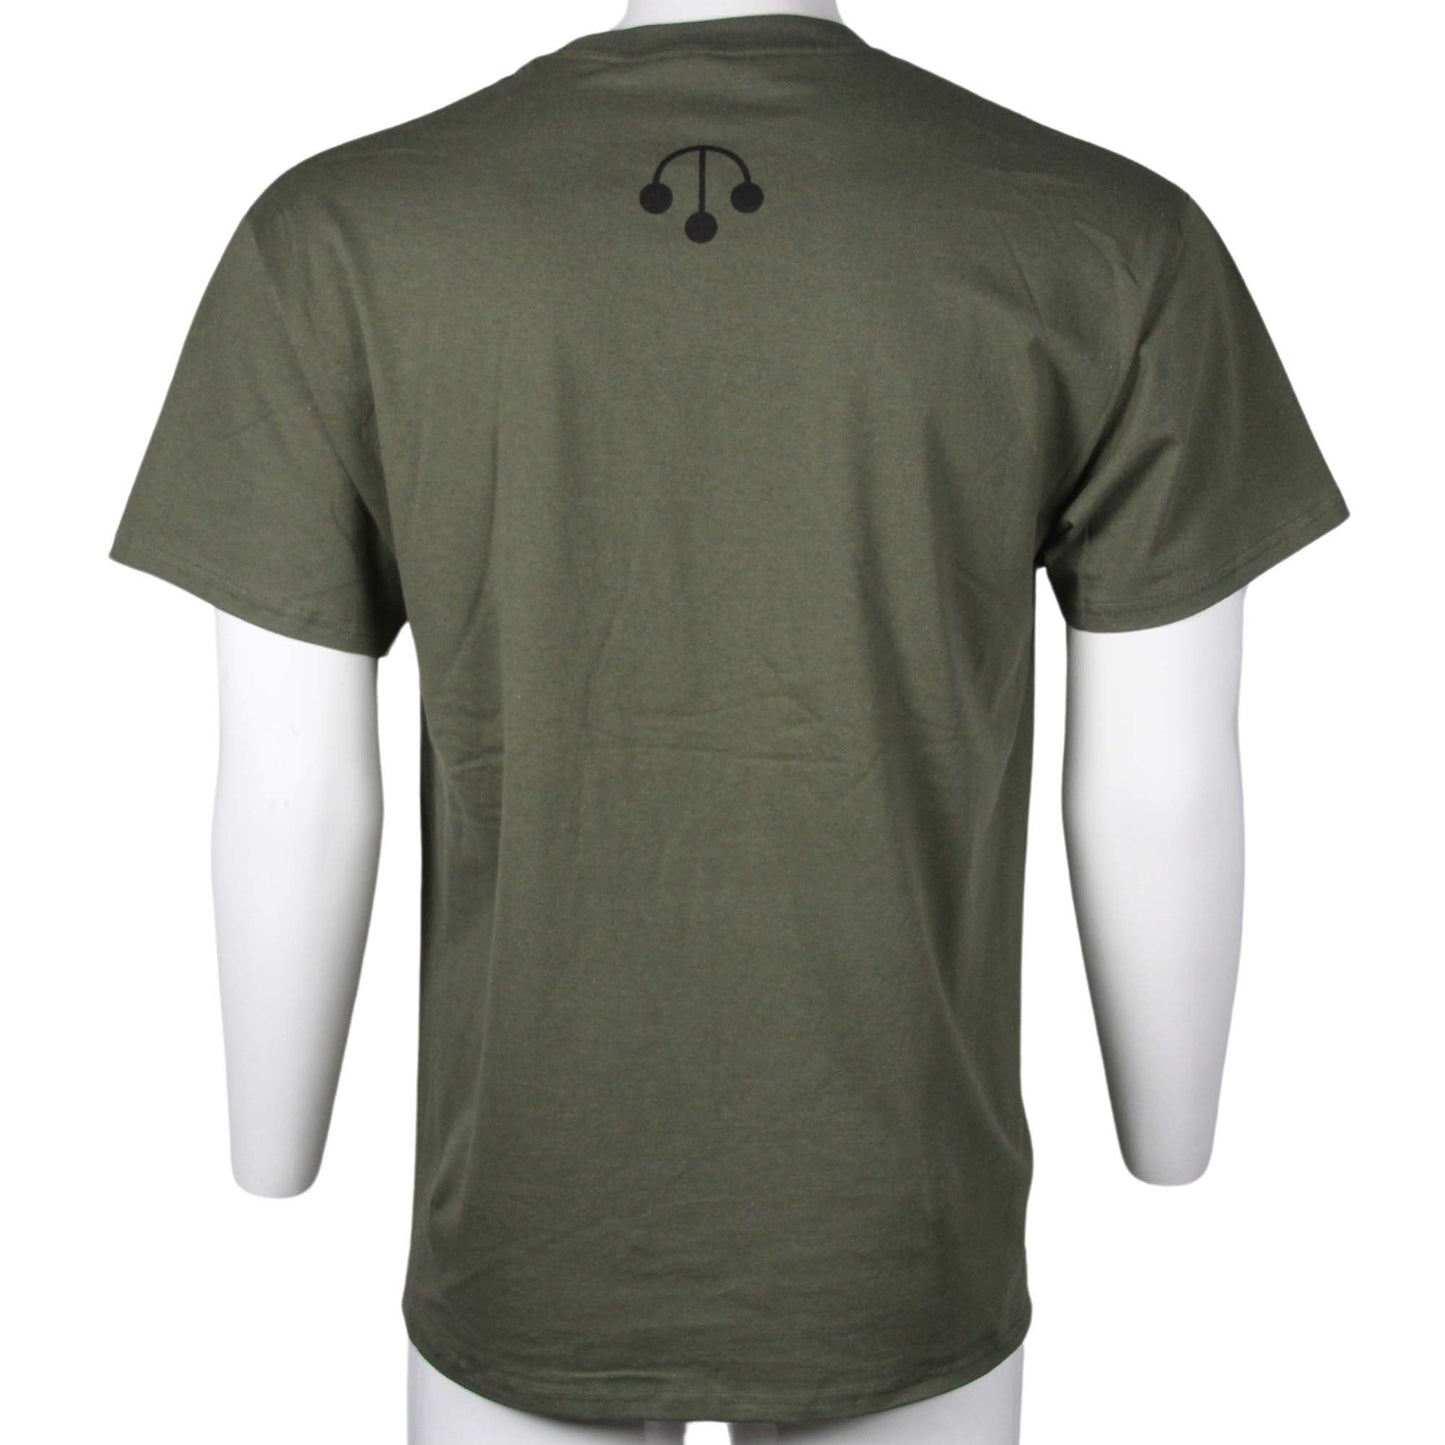 Gold & Silver Pawn Shop "Expert" Round Neck T-Shirt Green Back